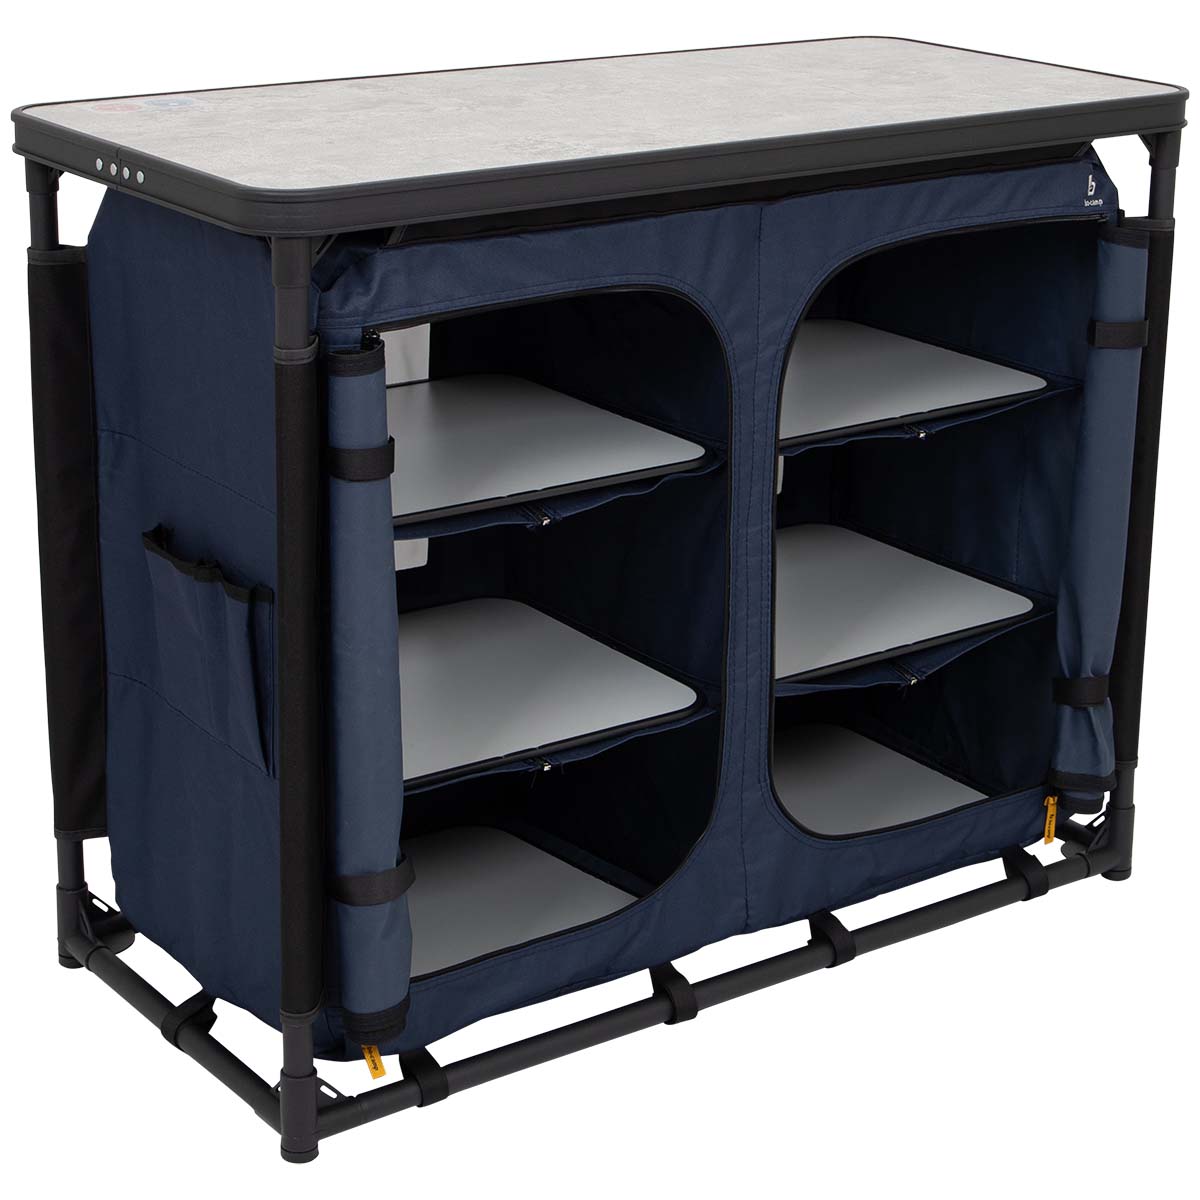 1593649 A stylish cooking island from the Industrial collection. With an extra sturdy dark blue 600 denier polyester cover with 6 handy shelves. The support sheet with concrete look is heat resistant, waterproof and suitable for a 4 burner gas stove. The adjustable legs are separately adjustable so the closet is stable on almost any surface.